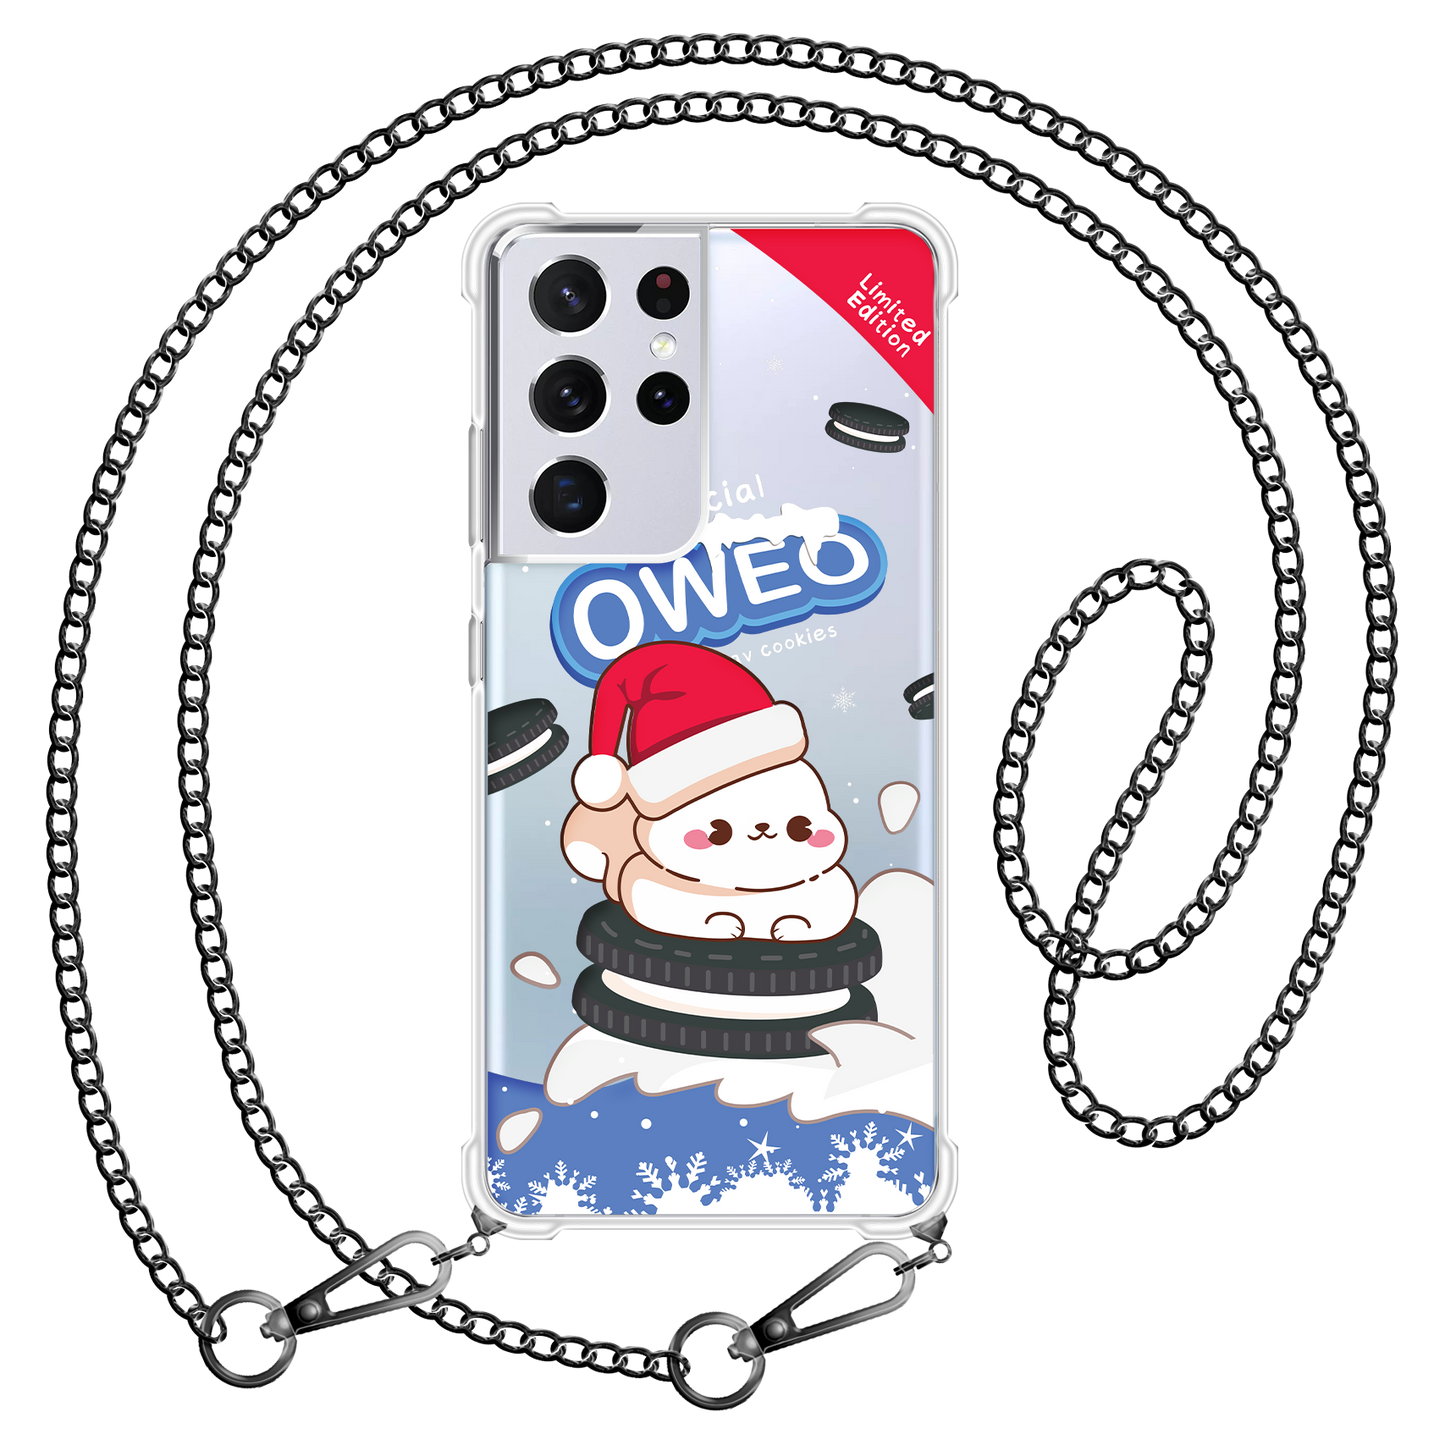 Android  - Oweo Christmas